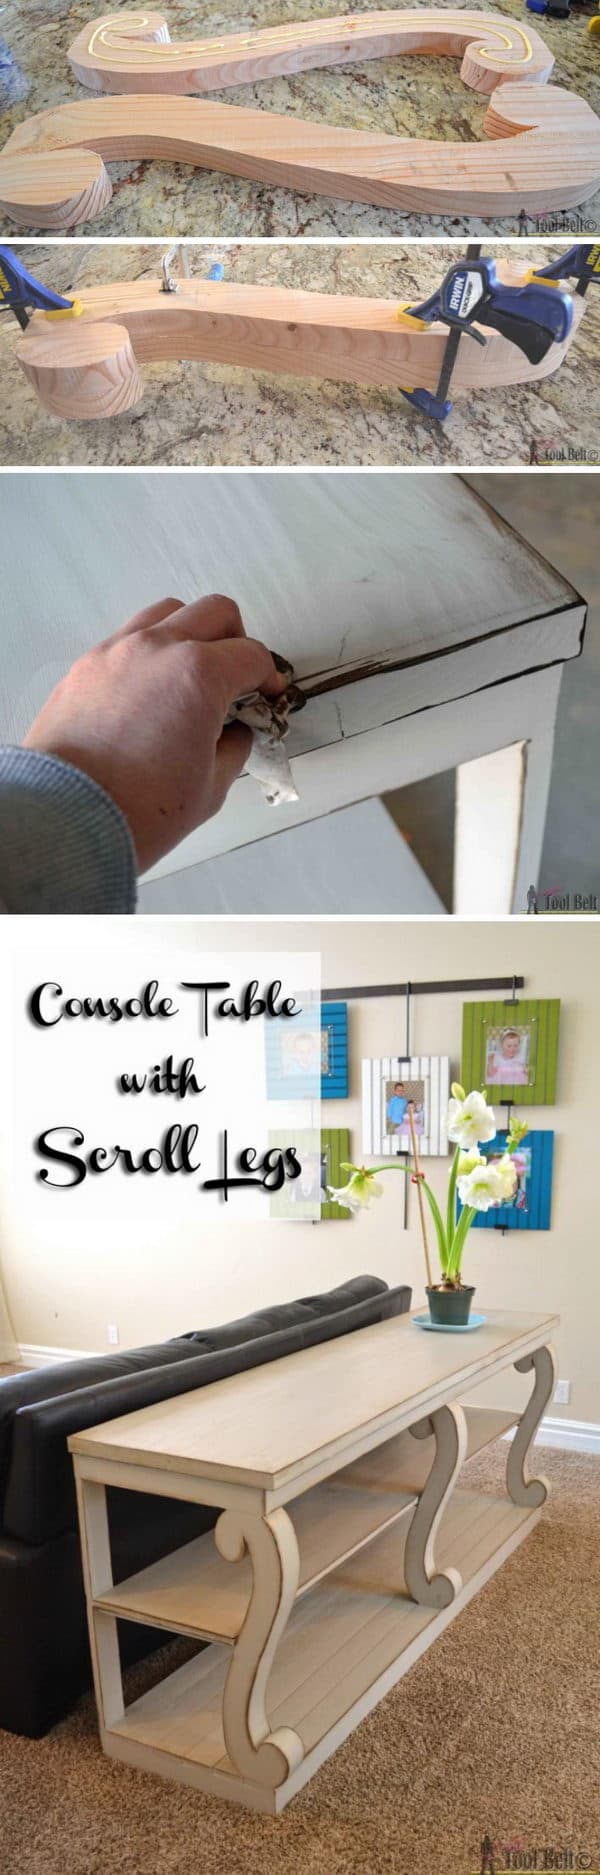 DIY Console Table With Scroll Legs